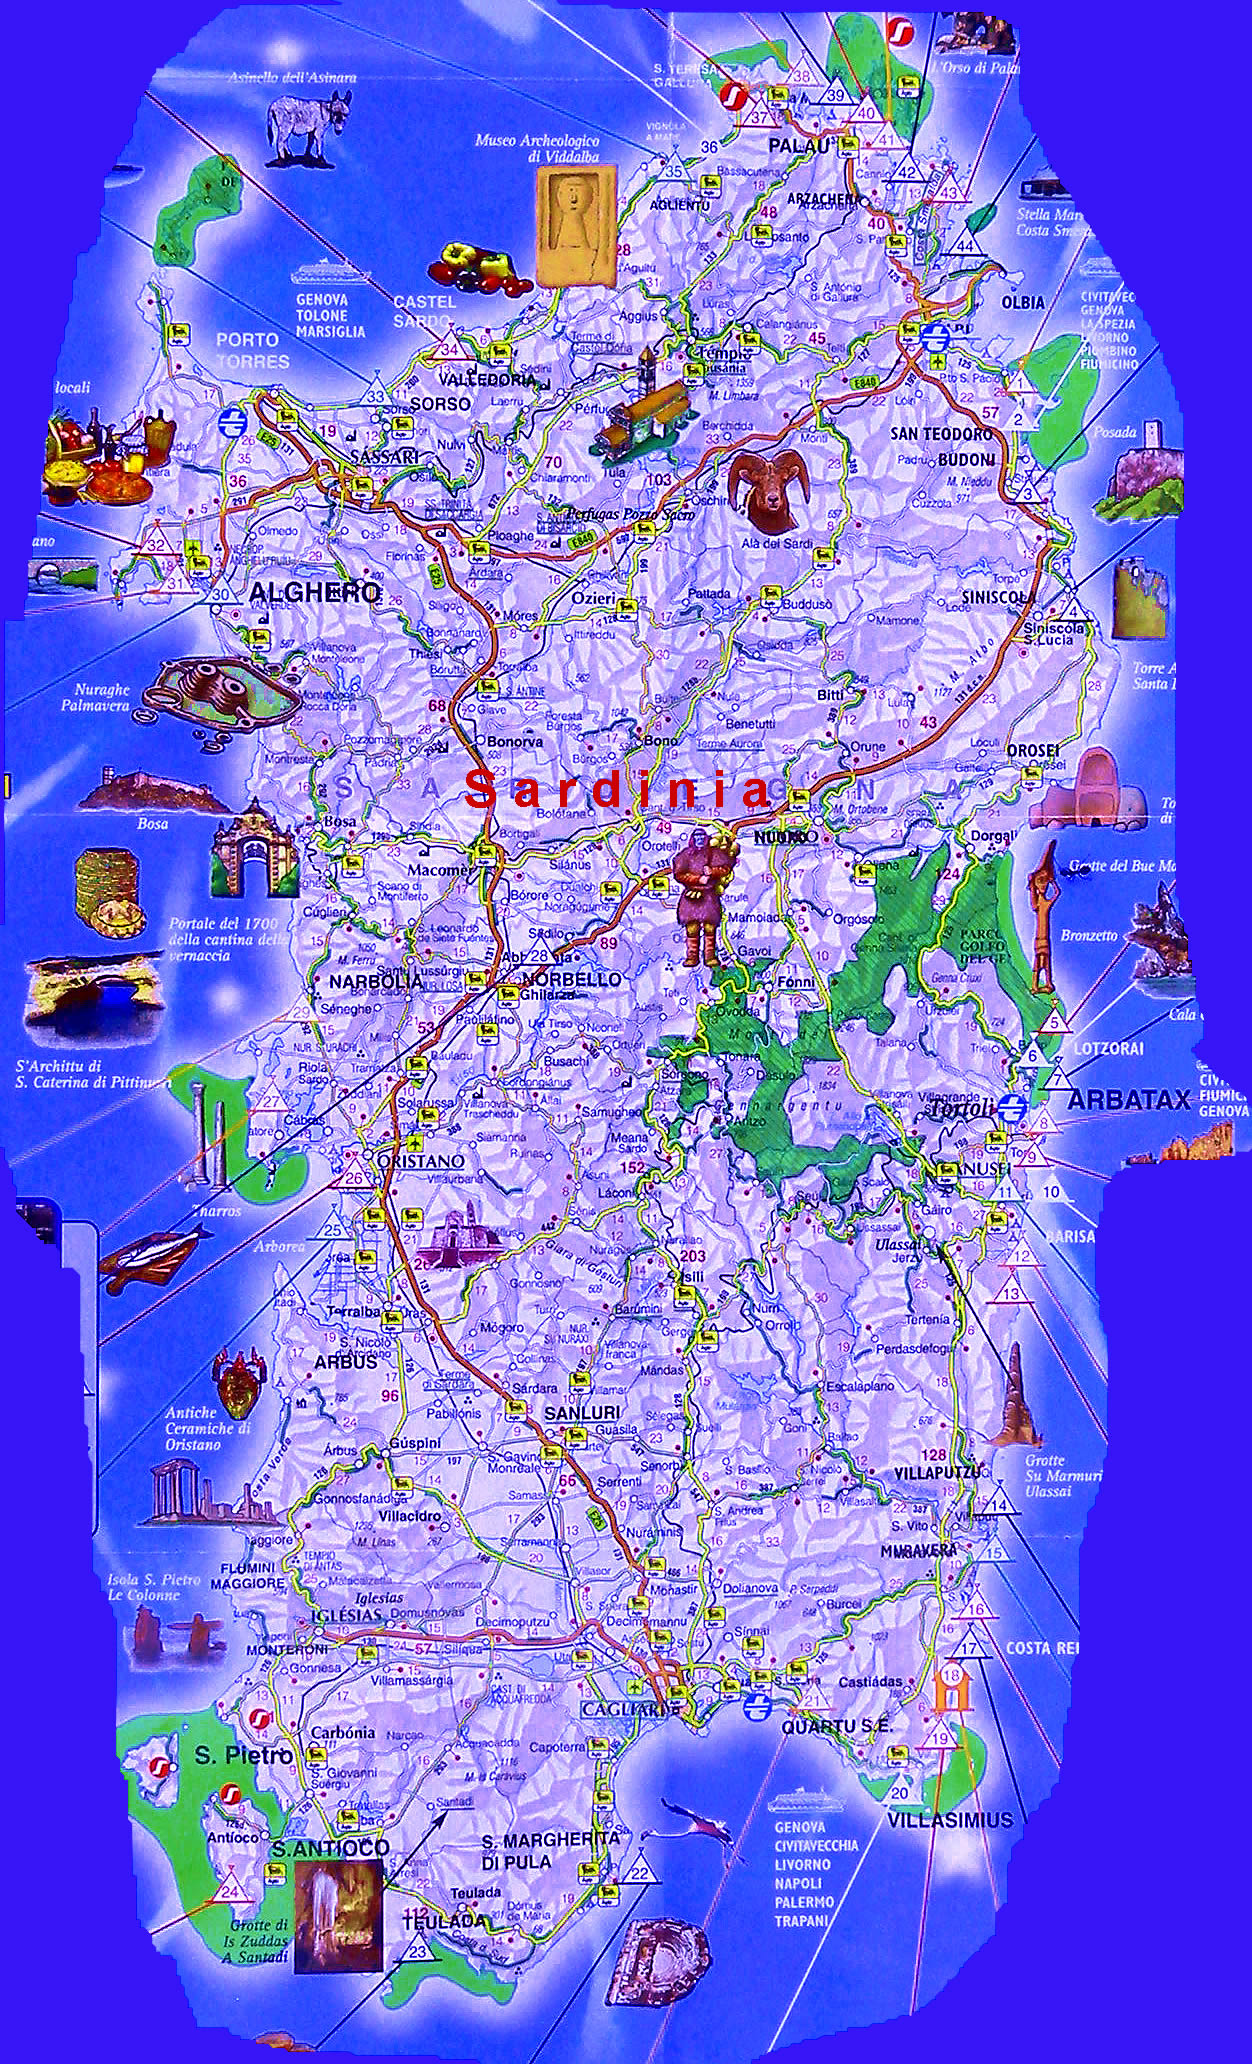 Tourist's map with roads and sights of the territory of Sardinia , Italy 